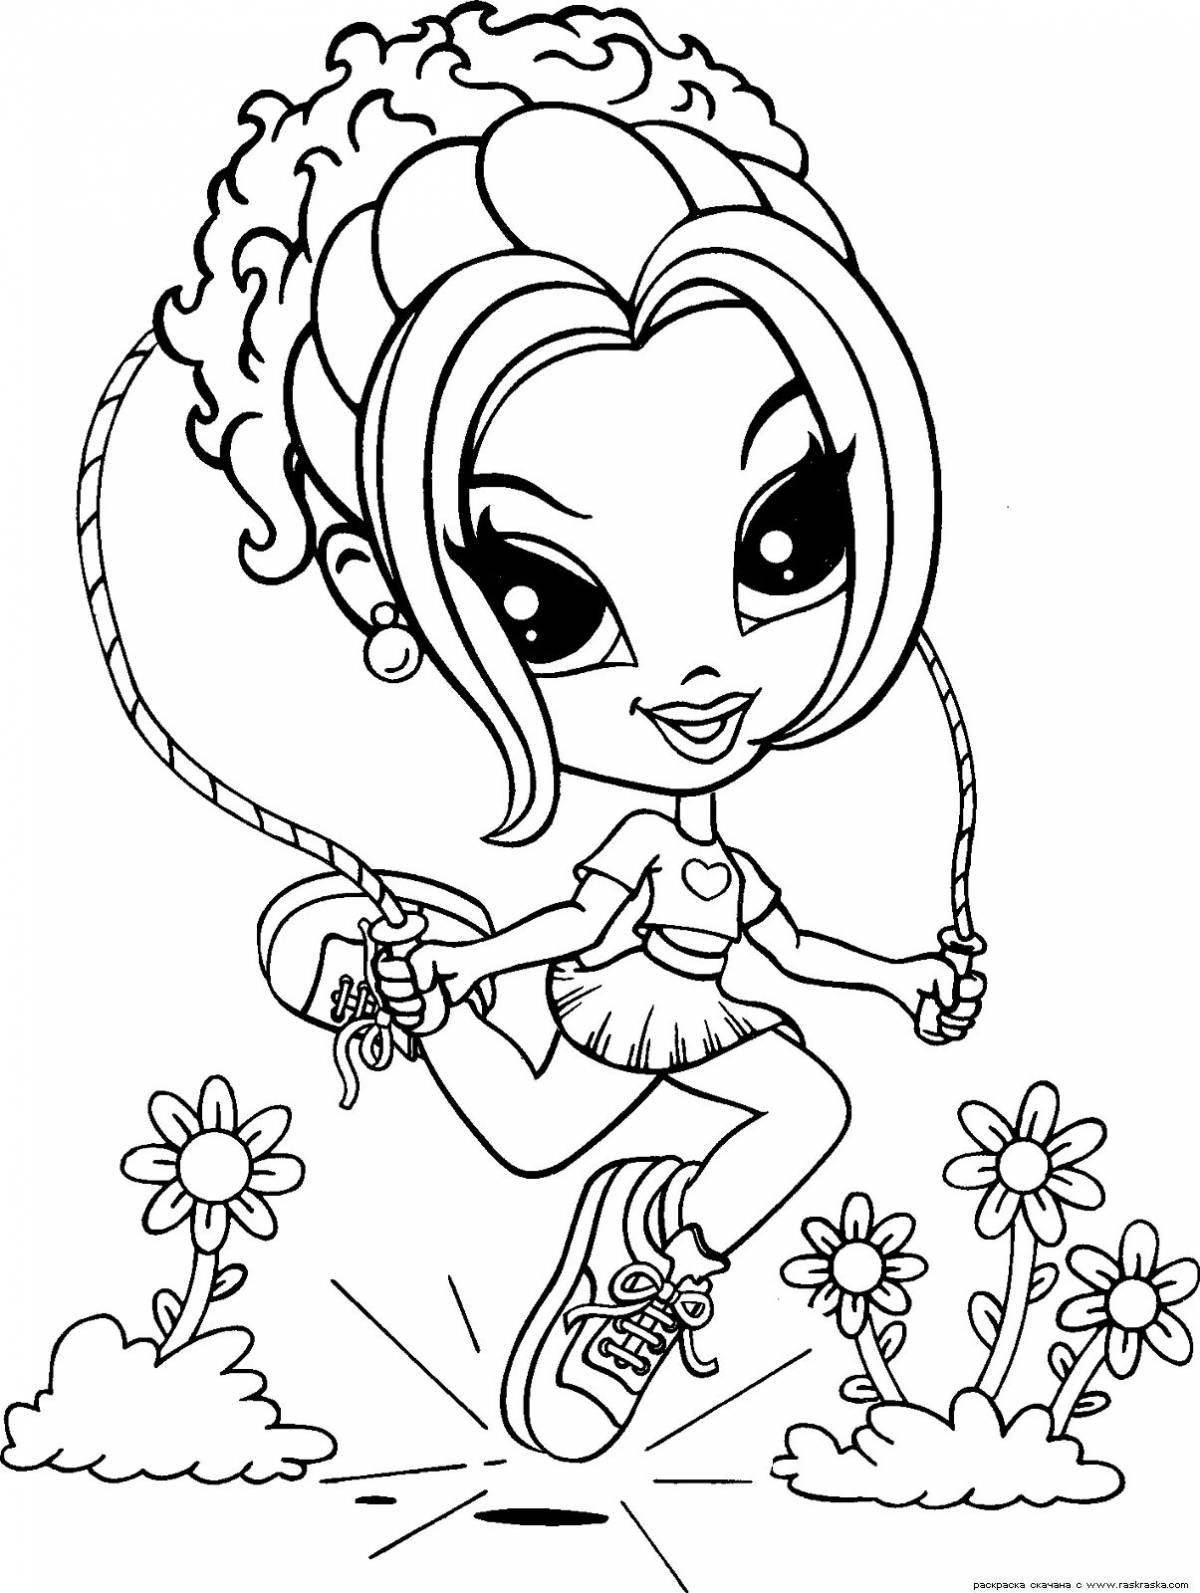 Great coloring game for girls 9-10 years old